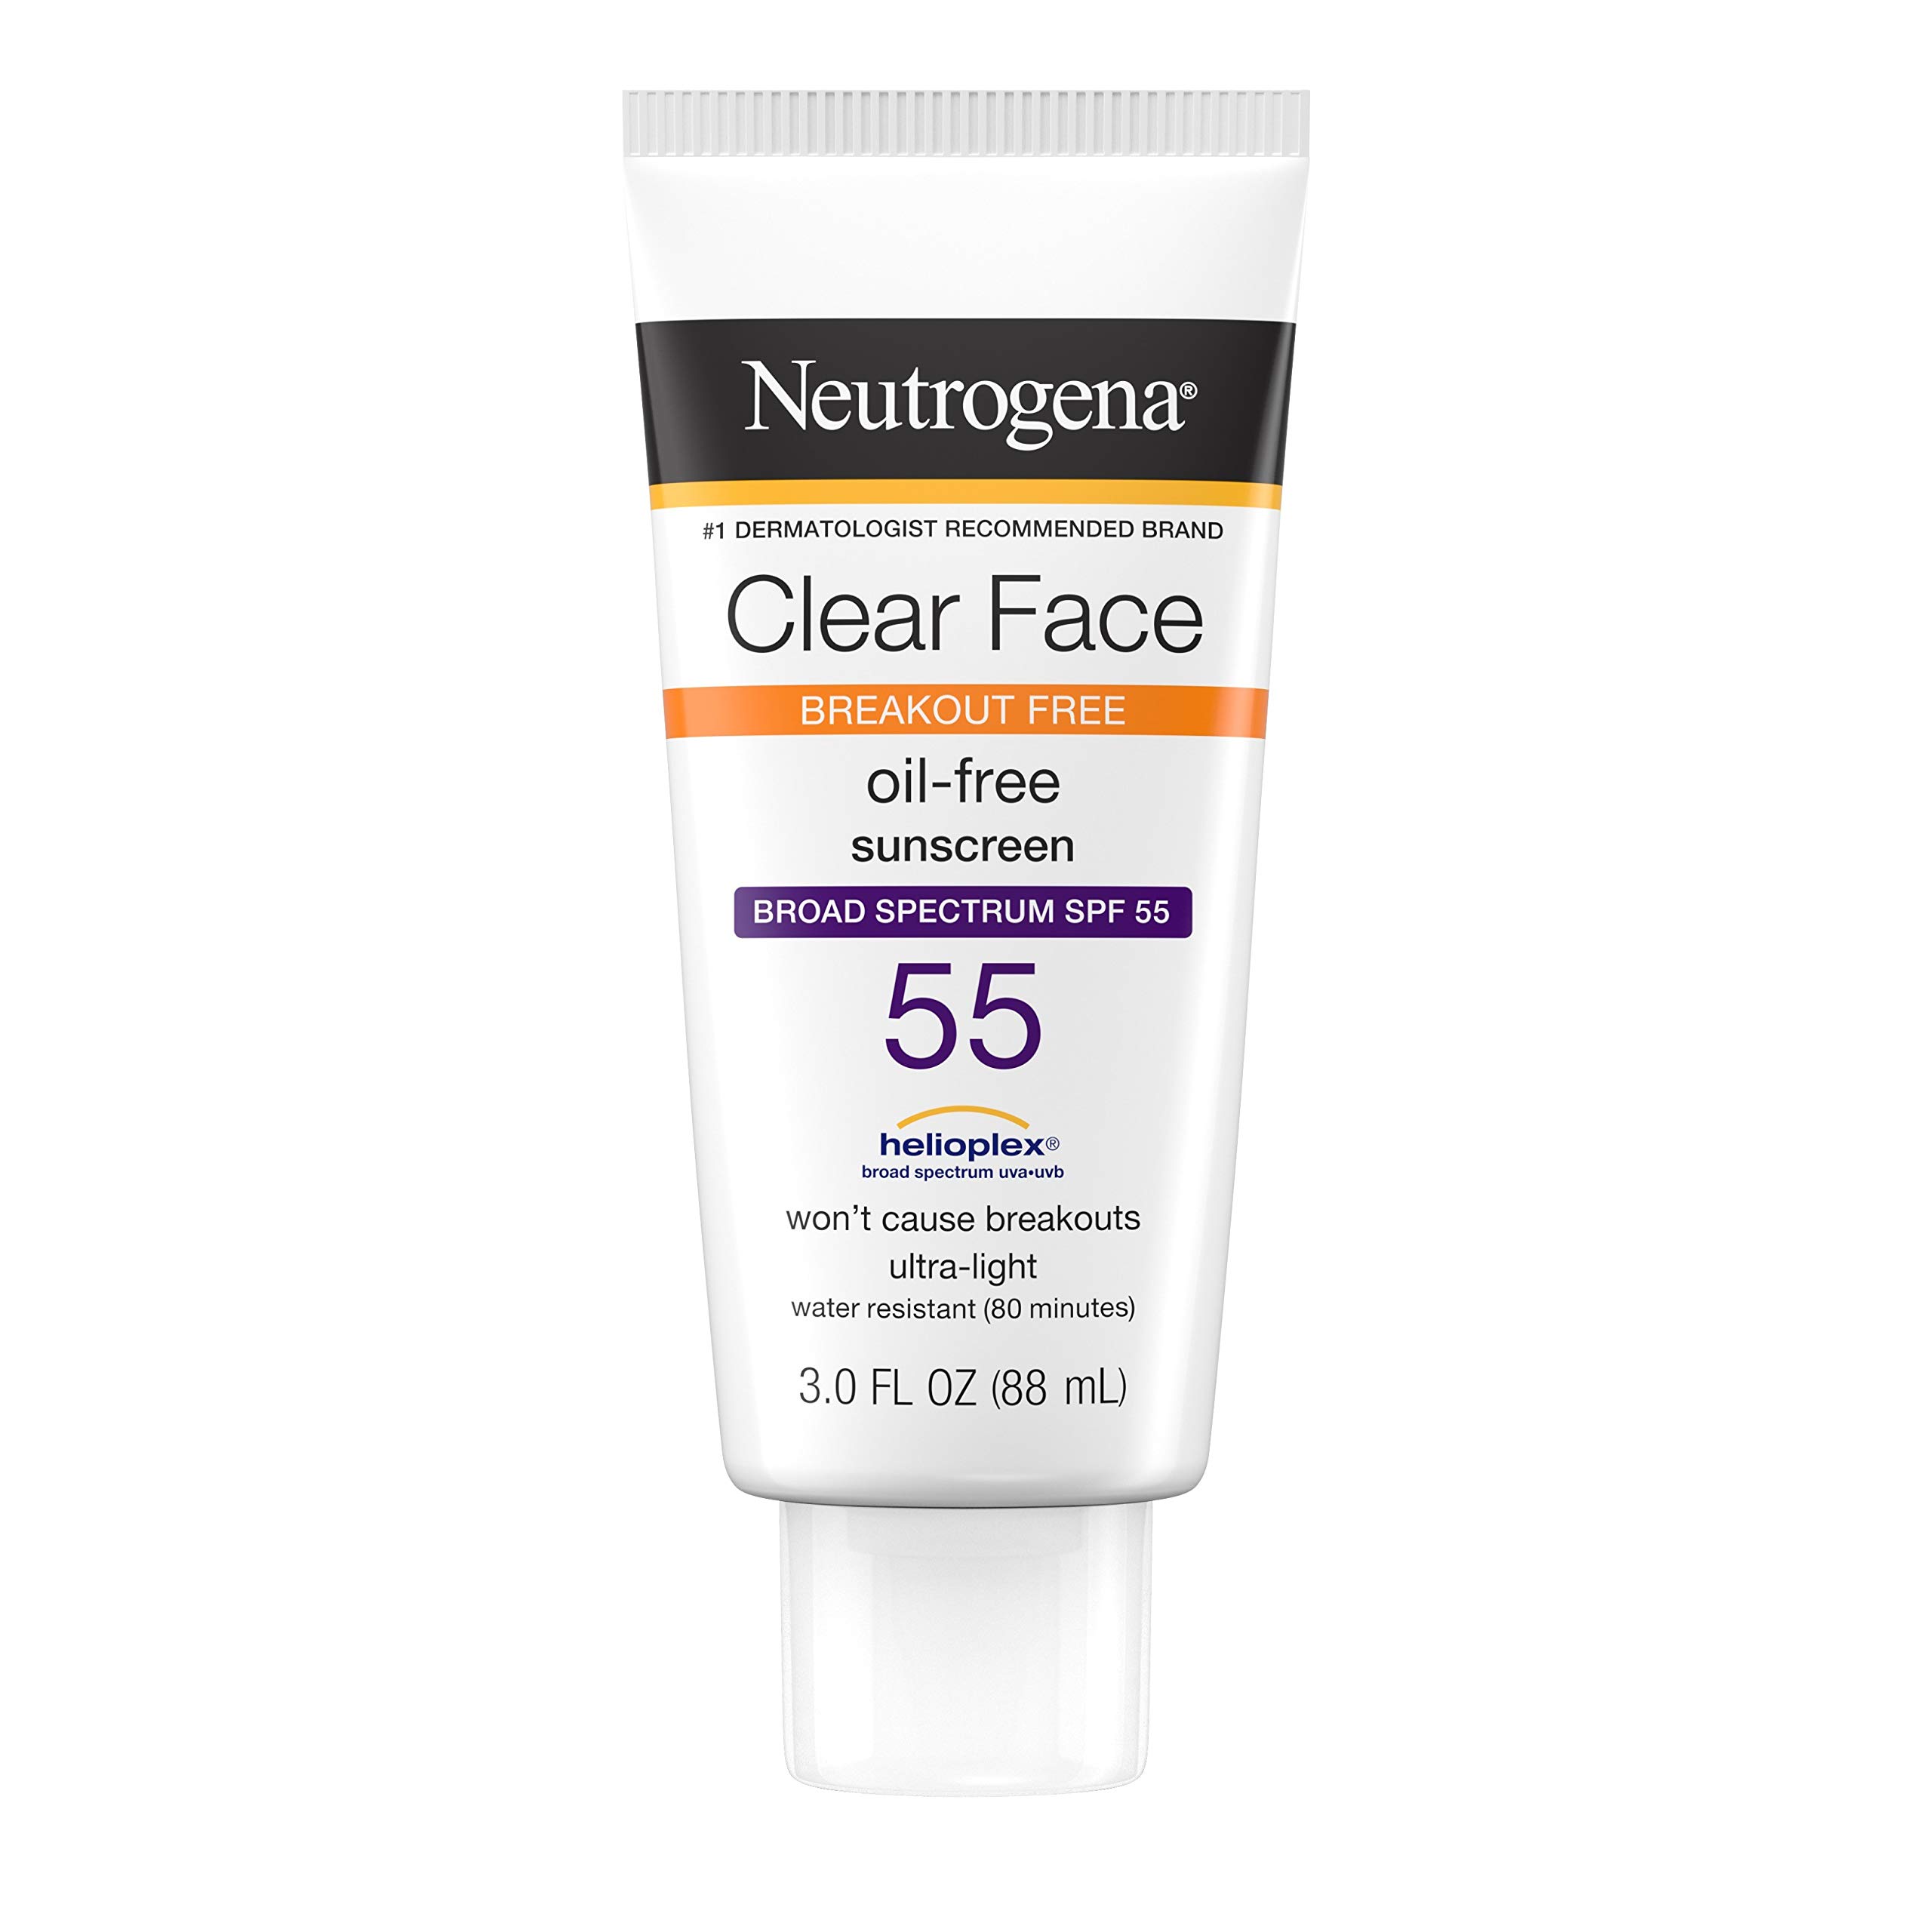 Neutrogena Clear Face Liquid Lotion Sunscreen for Acne-Prone Skin, Broad Spectrum SPF 55 with Helioplex Technology, Oil-Free, Fragrance-Free & Non-Comedogenic Facial Sunscreen, 3 fl. oz